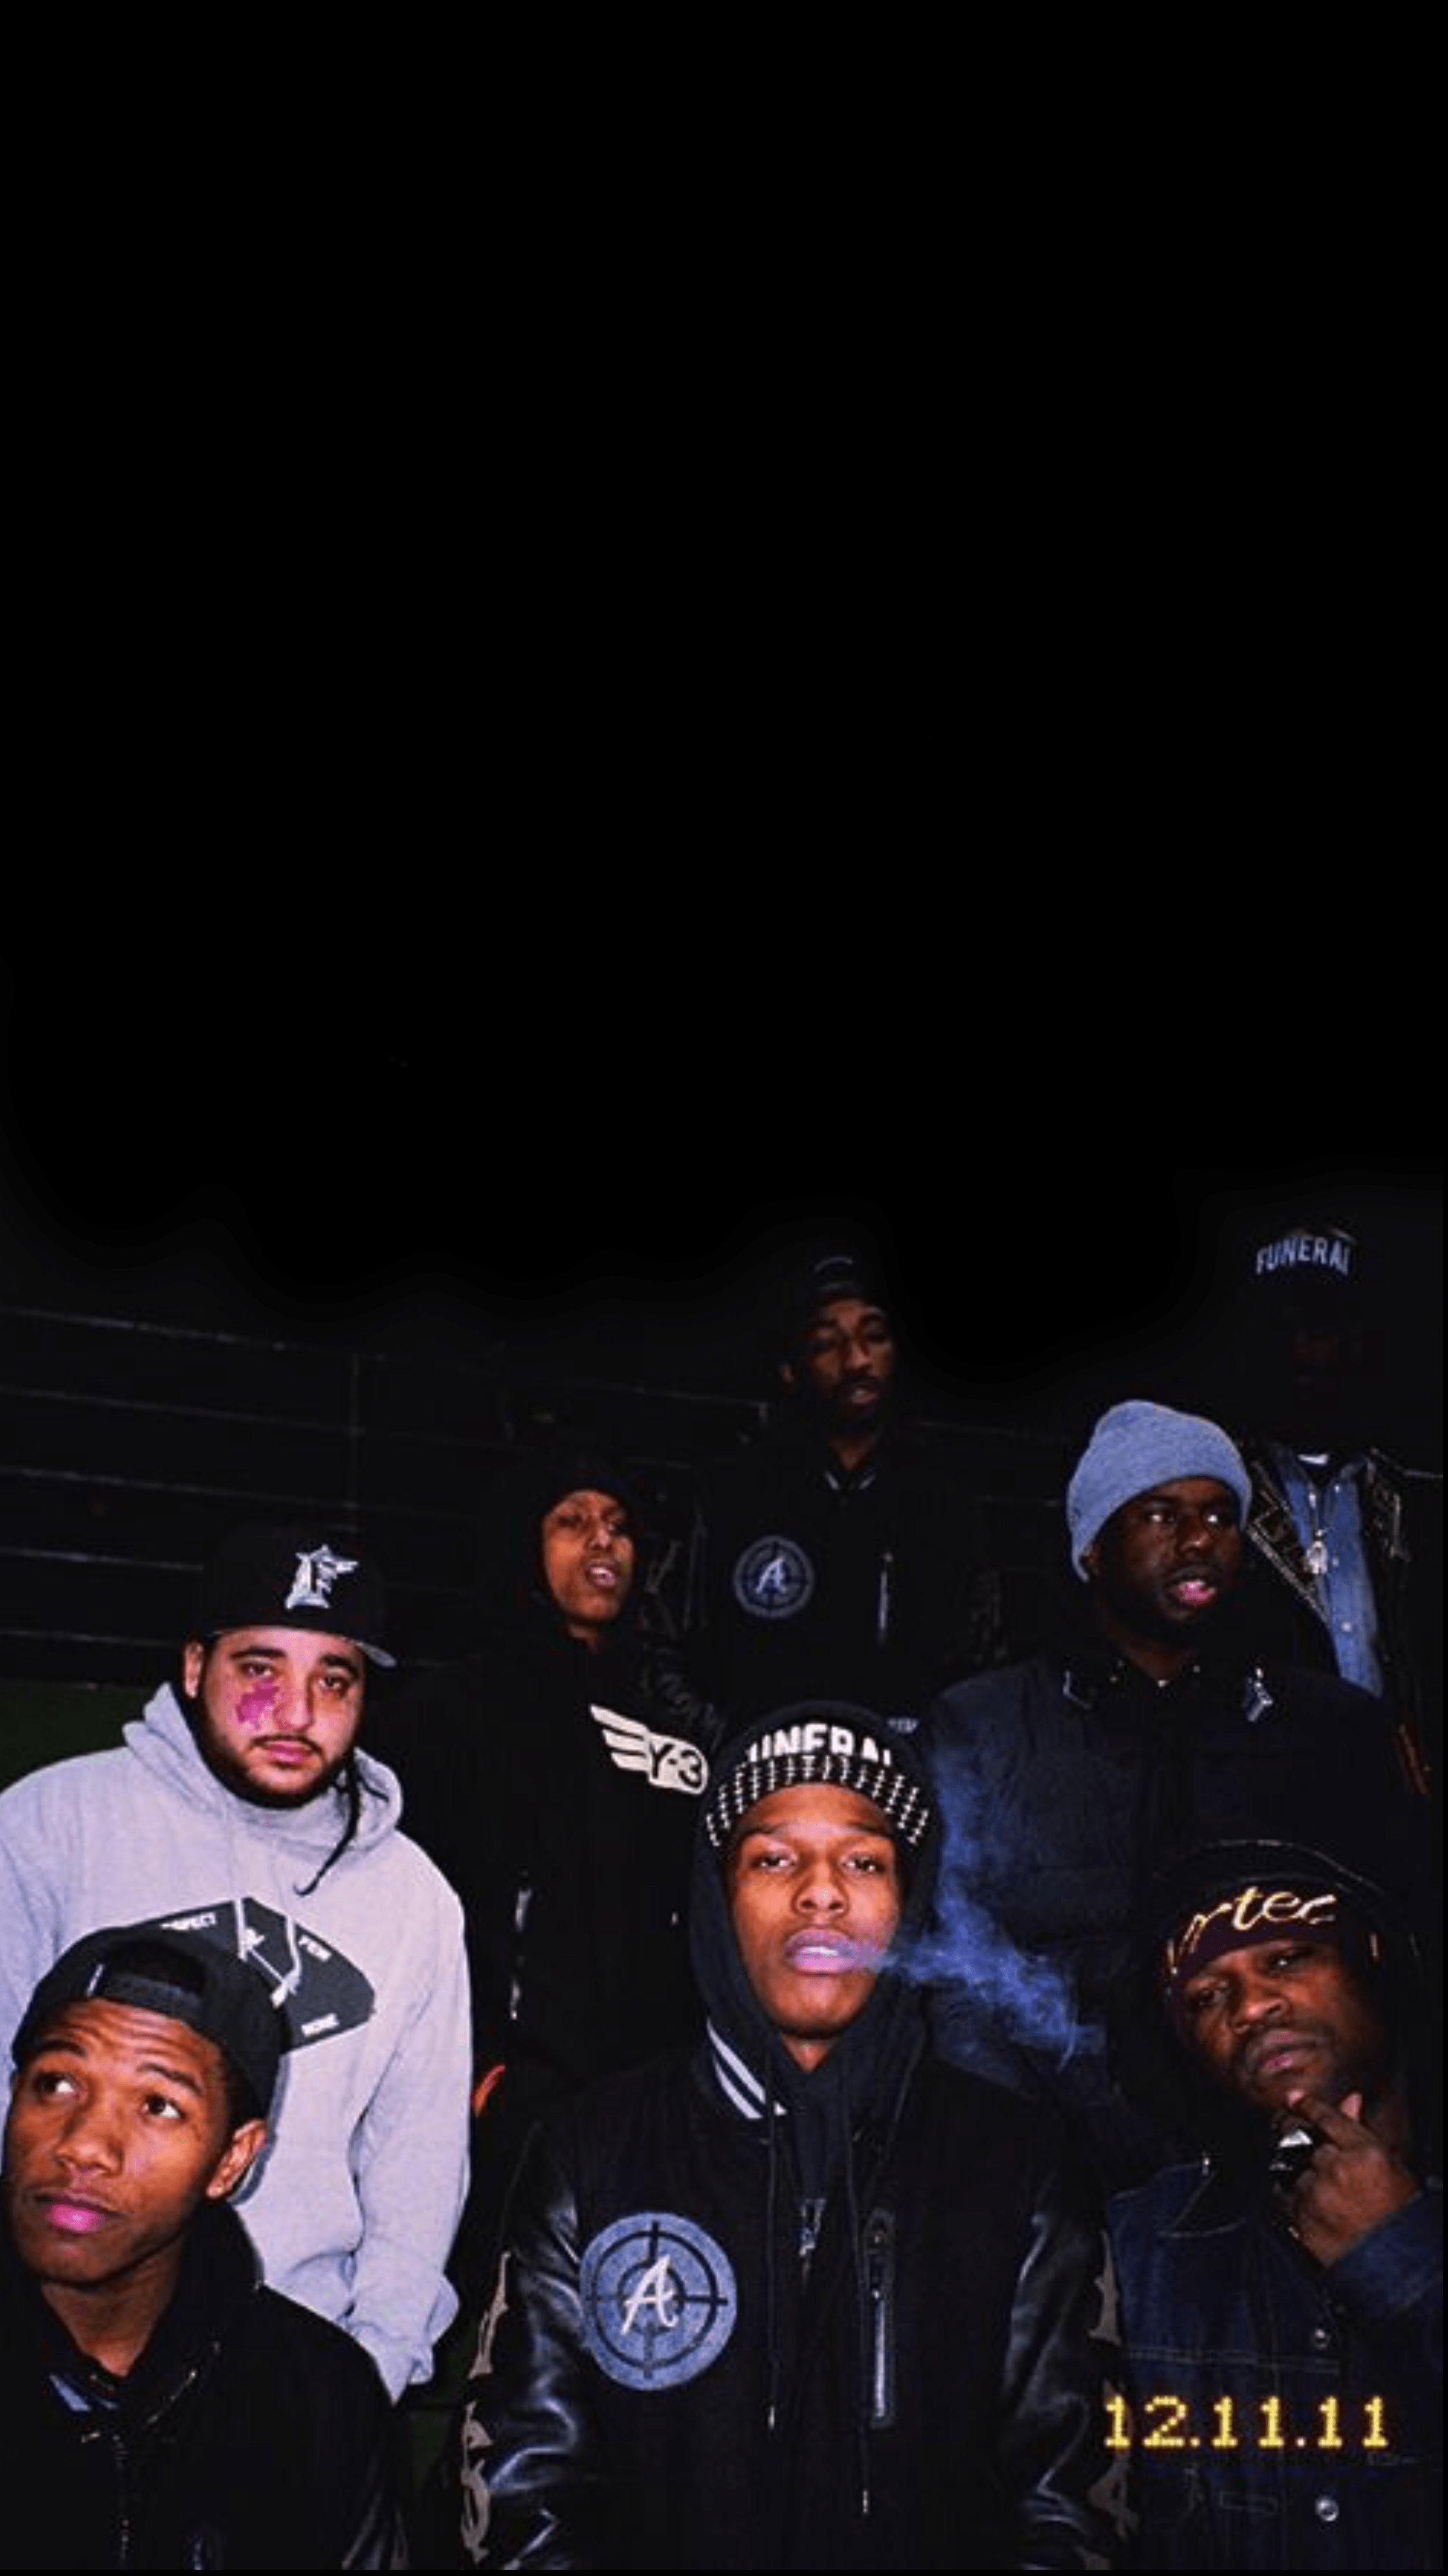 Rappers For Iphone Wallpapers Wallpaper Cave Moon in dark iphone wallpaper. rappers for iphone wallpapers